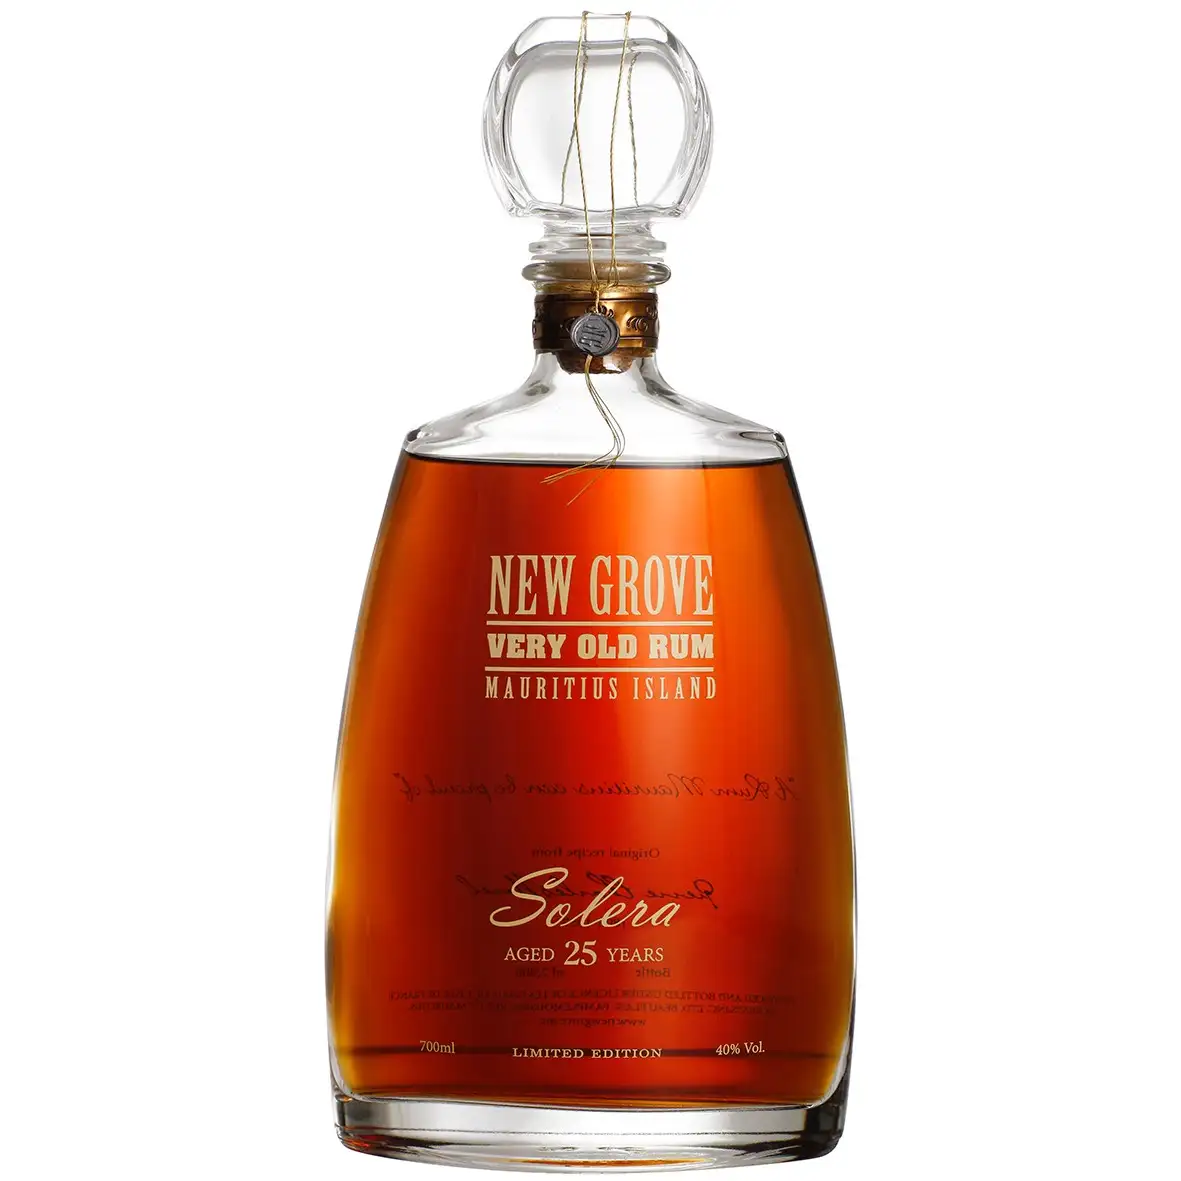 Image of the front of the bottle of the rum New Grove Very Old Rum Solera 25 Years